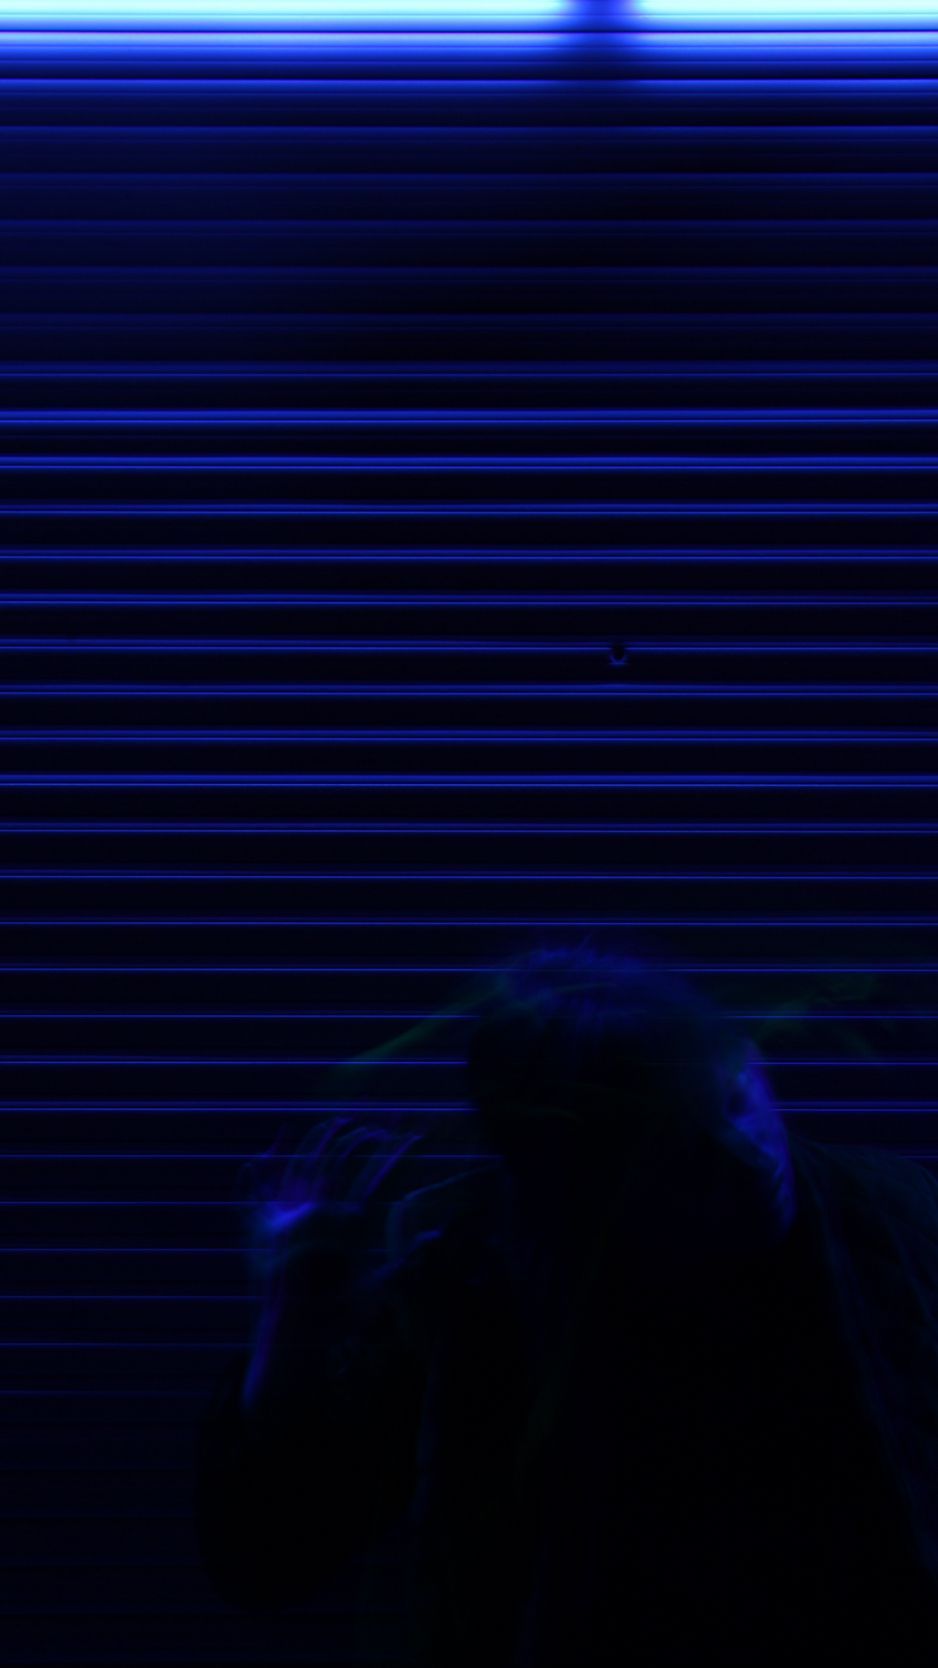 A person standing in front of a wall with blue lights. - Creepy